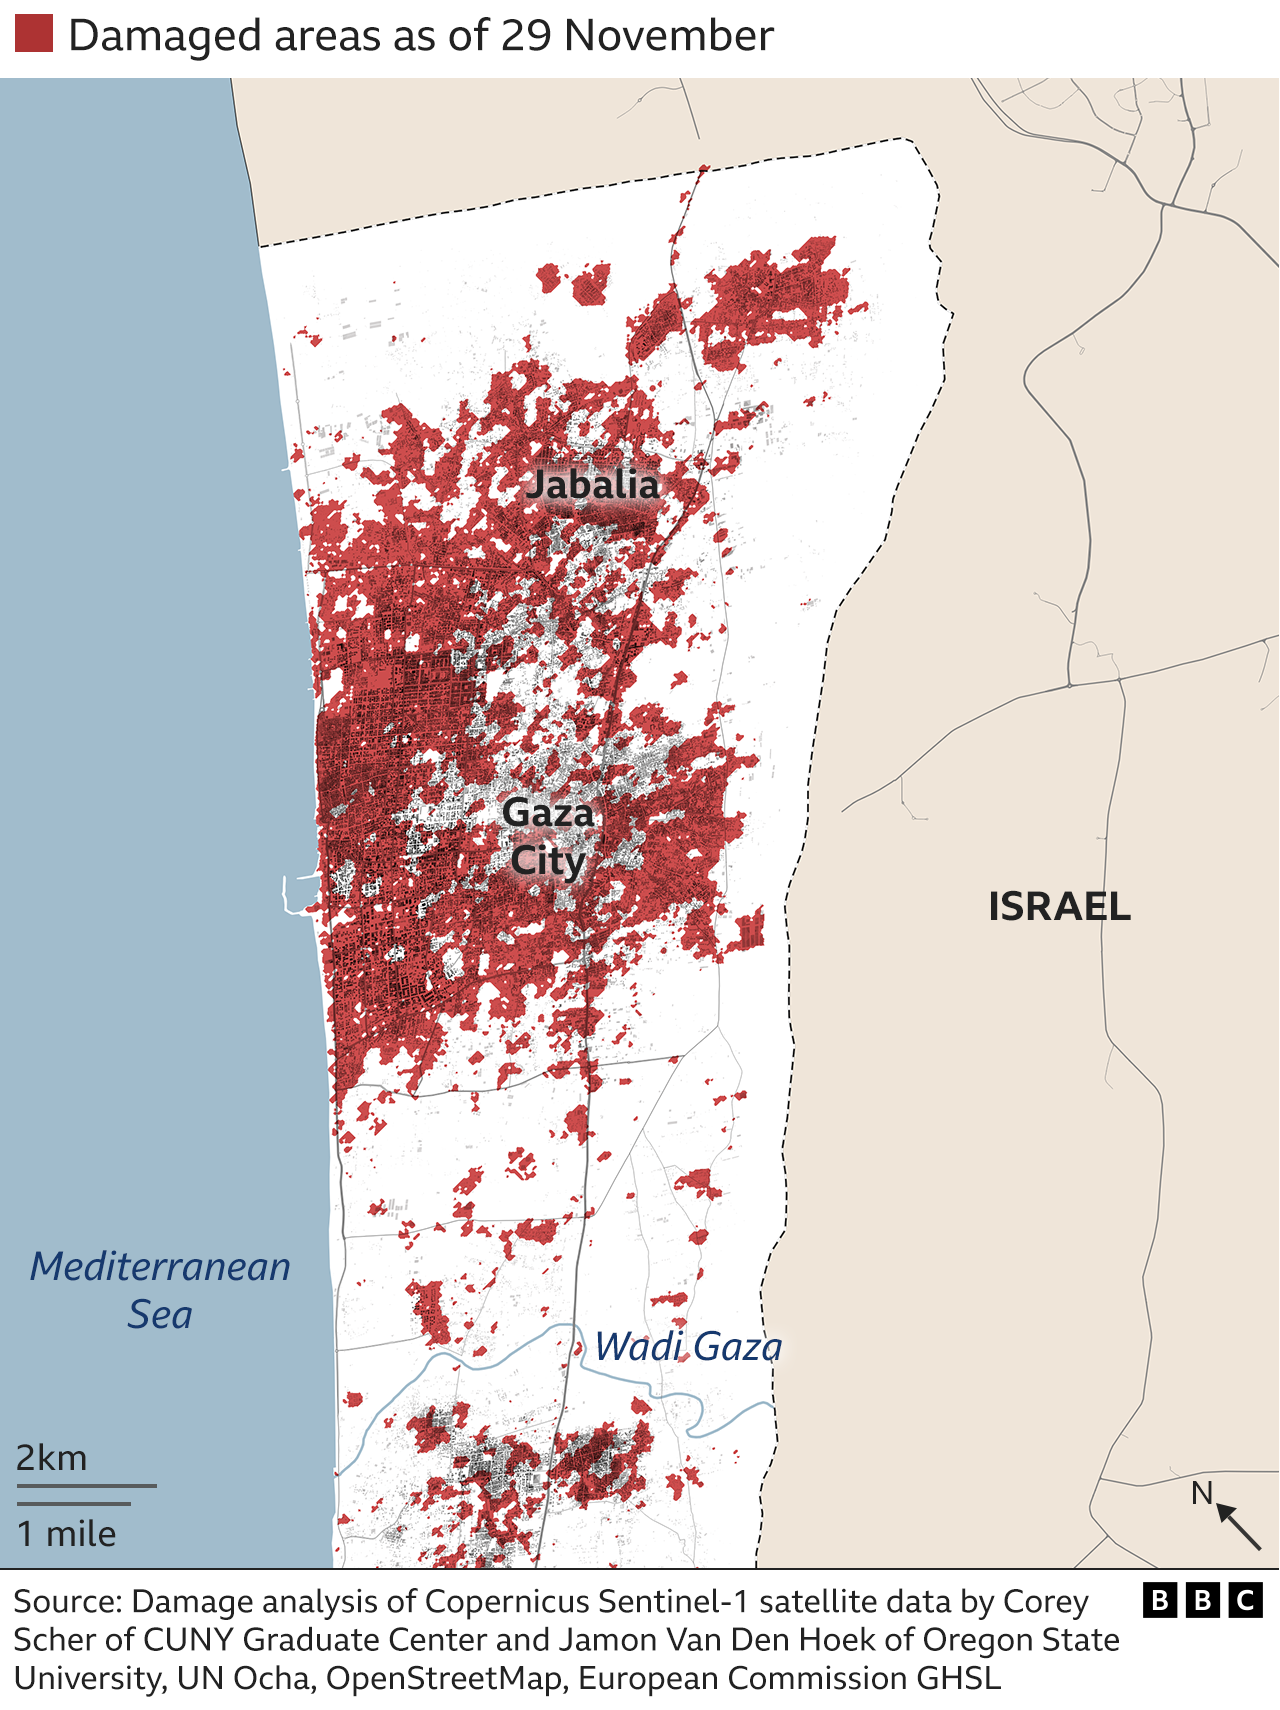 Map showing satellite analysis of damage to buildings in northern Gaza up to 29 November.